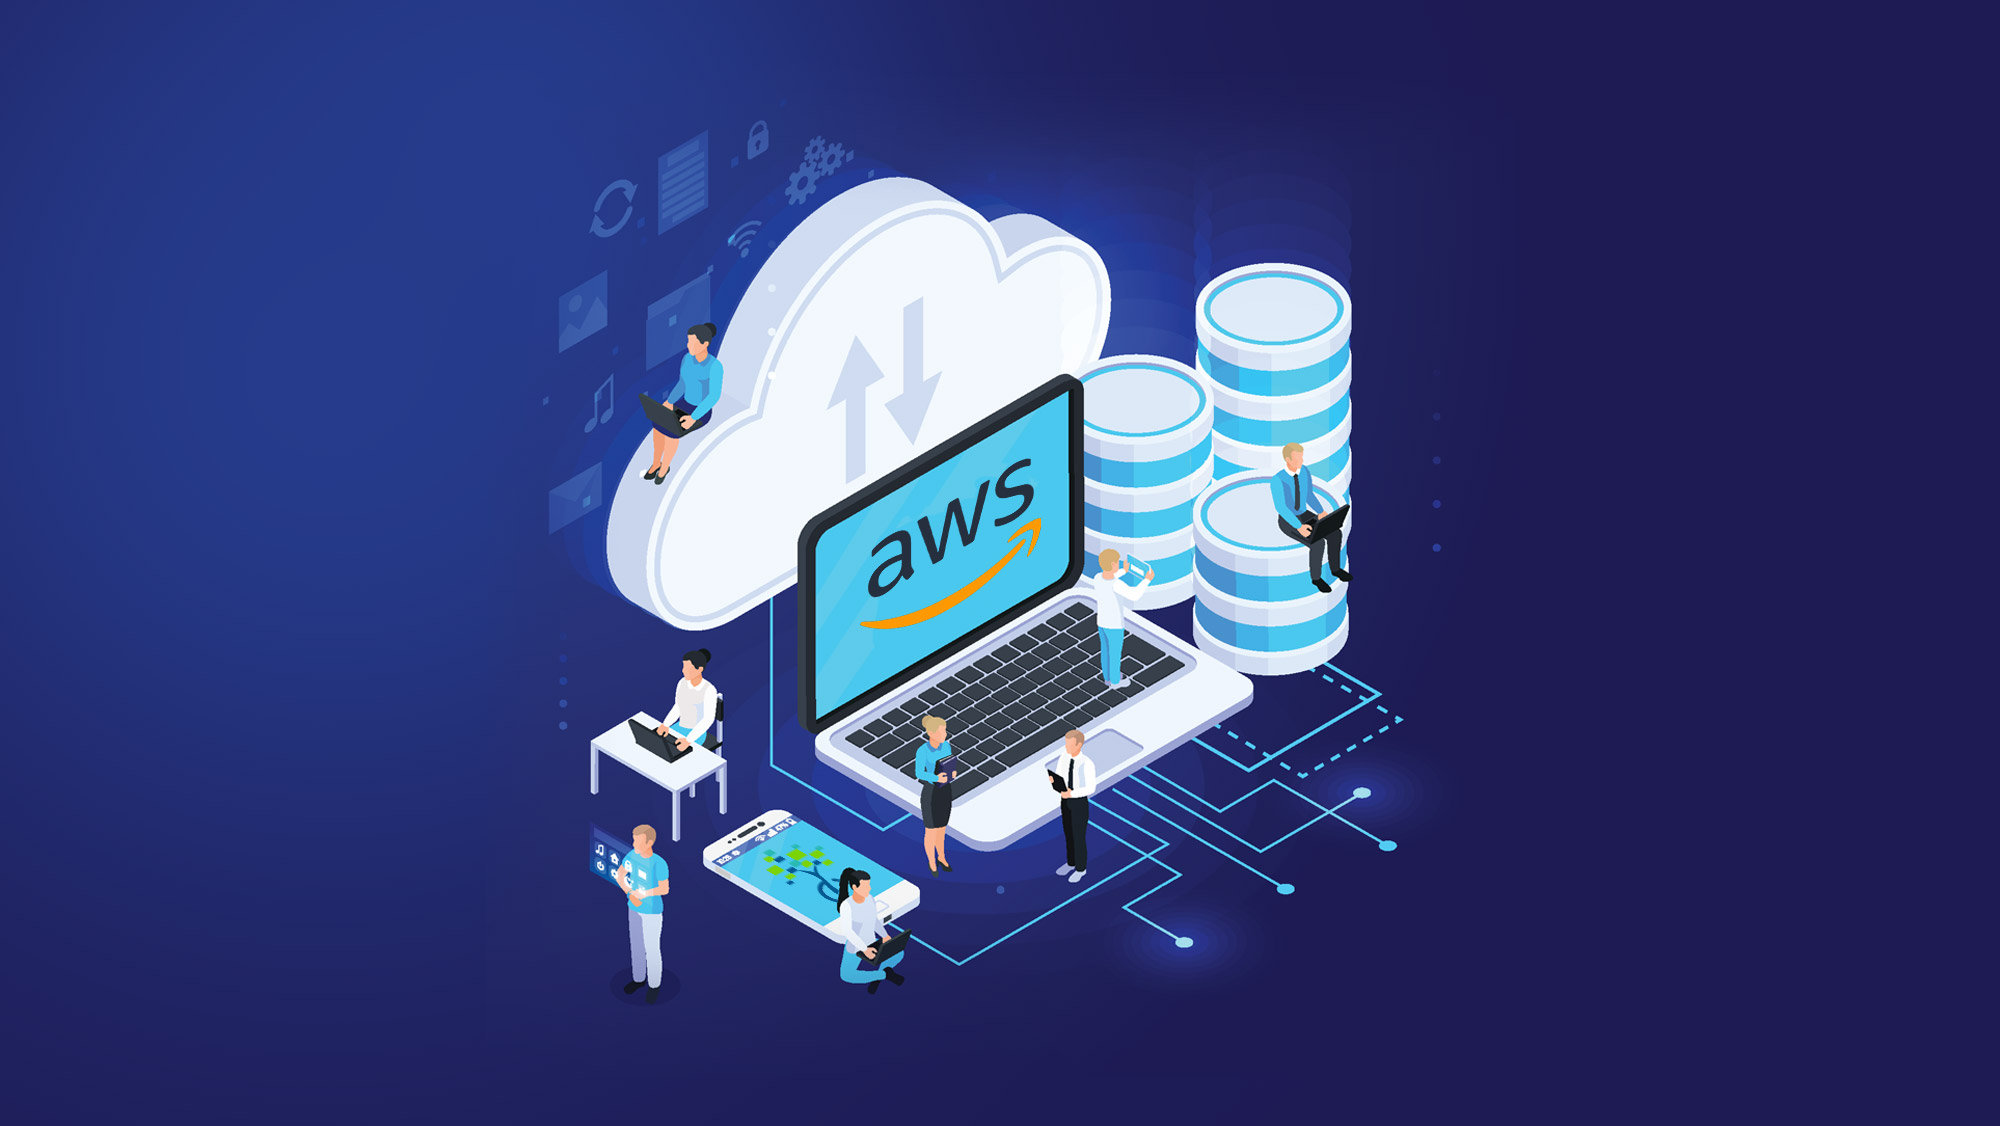 How to get started with Amazon Web Services: A beginner's guide